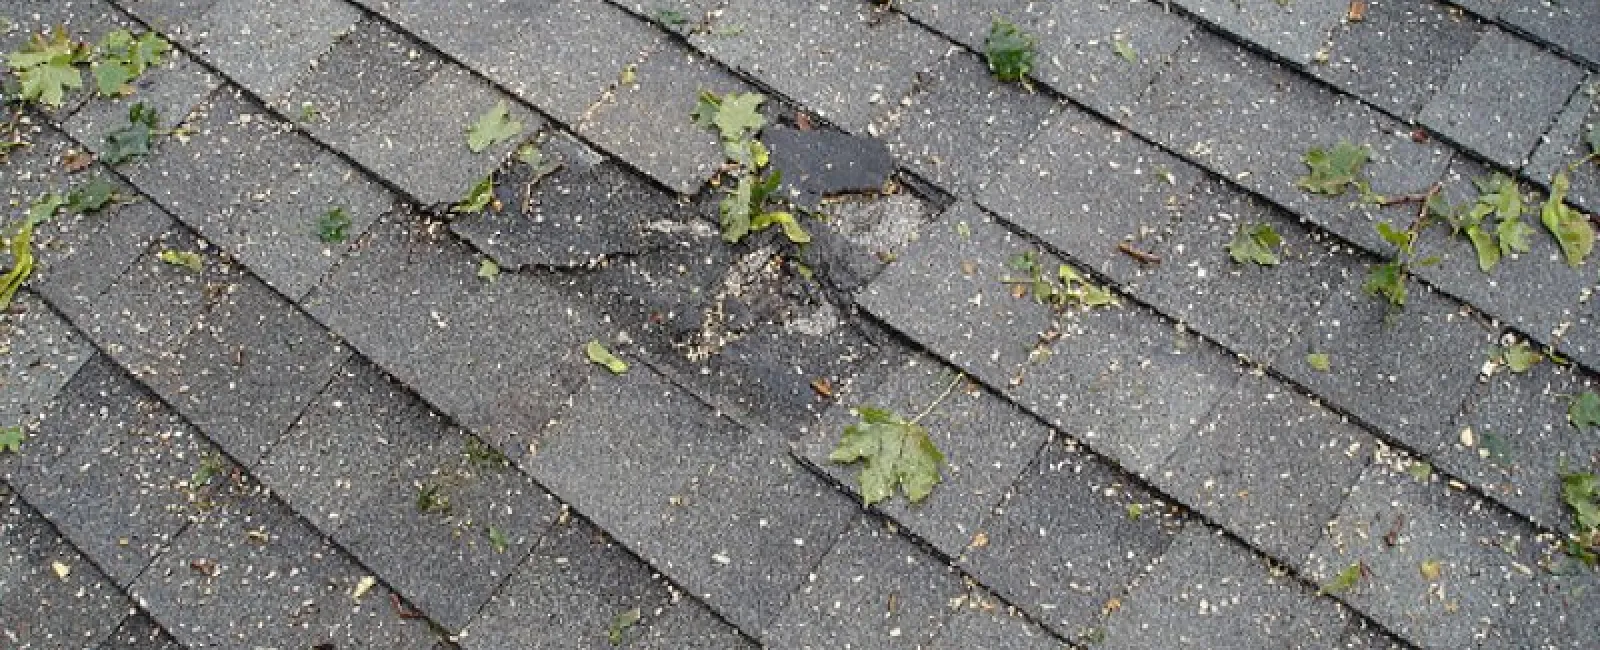 Blistering Buckling Curling: 3 Signs Your Roof Isn’t Doing Well